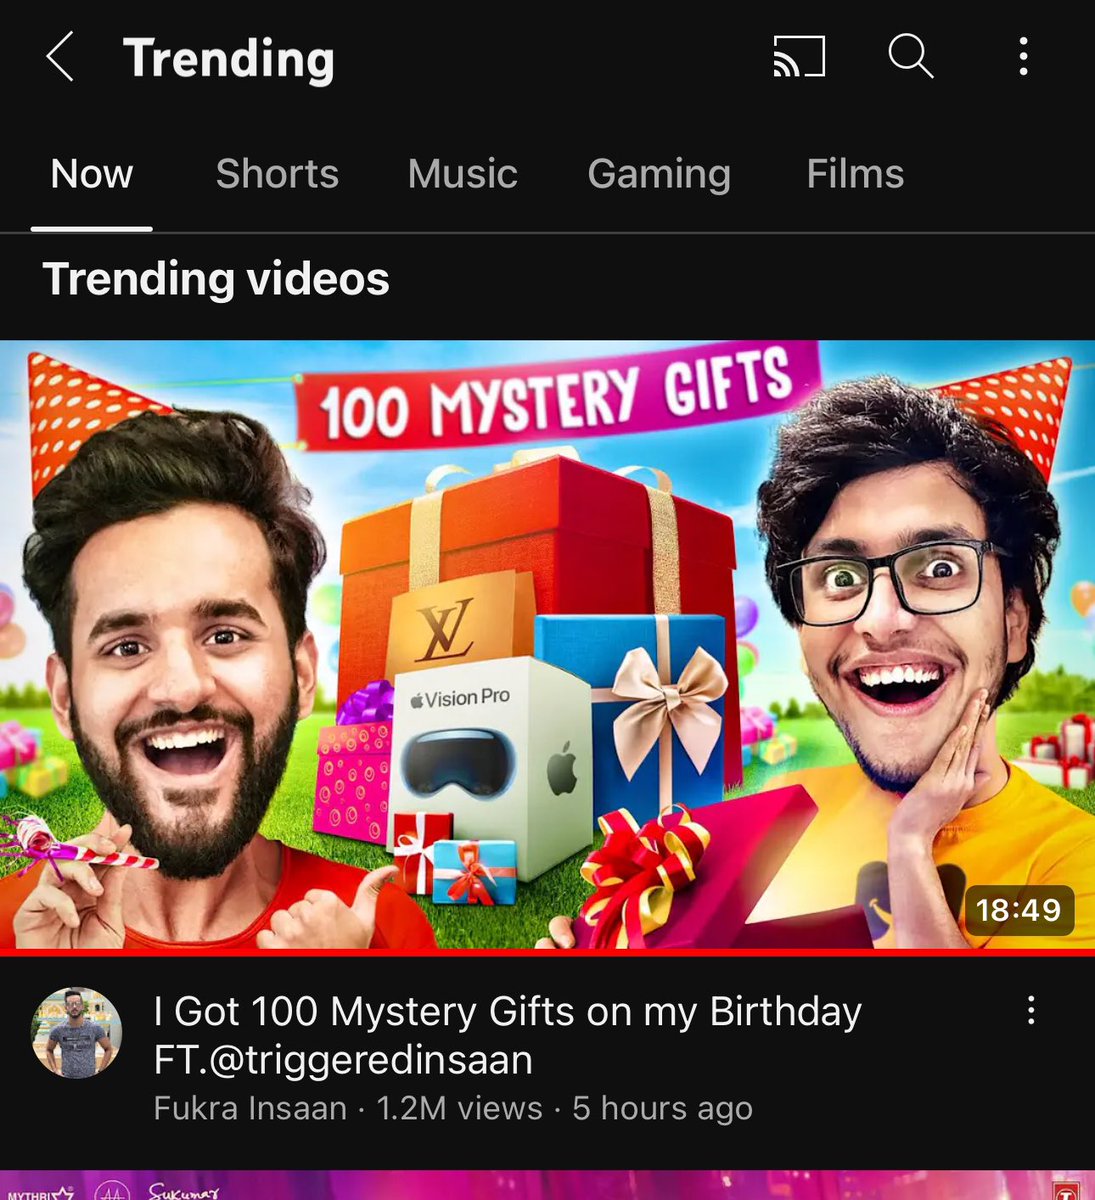 This video is on fire 🔥 TRENDING 1🚀🚀 Do not miss this one💰♥️